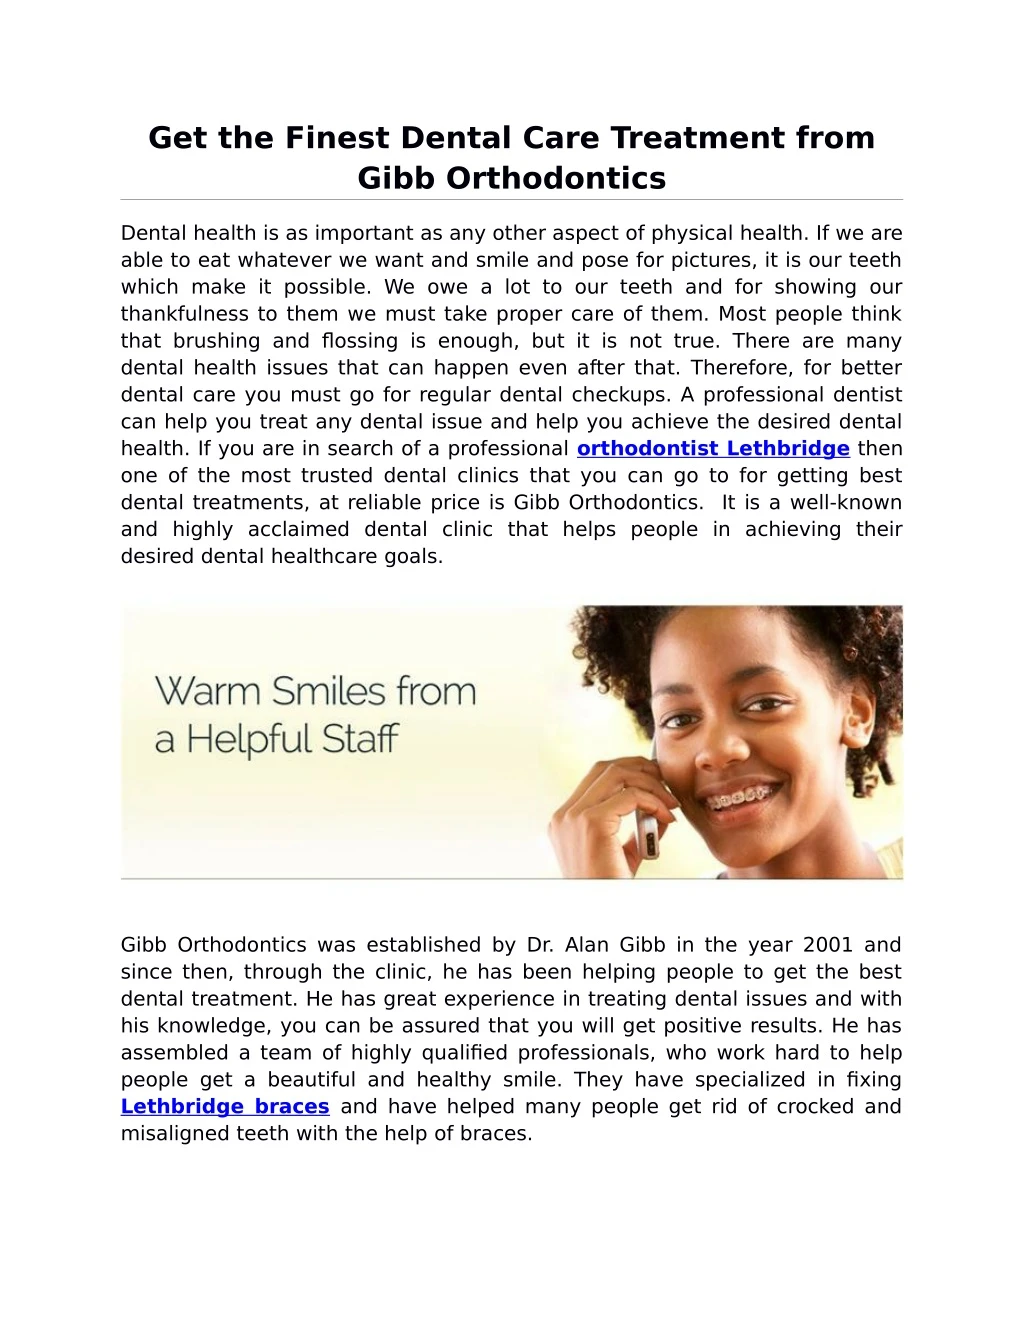 get the finest dental care treatment from gibb